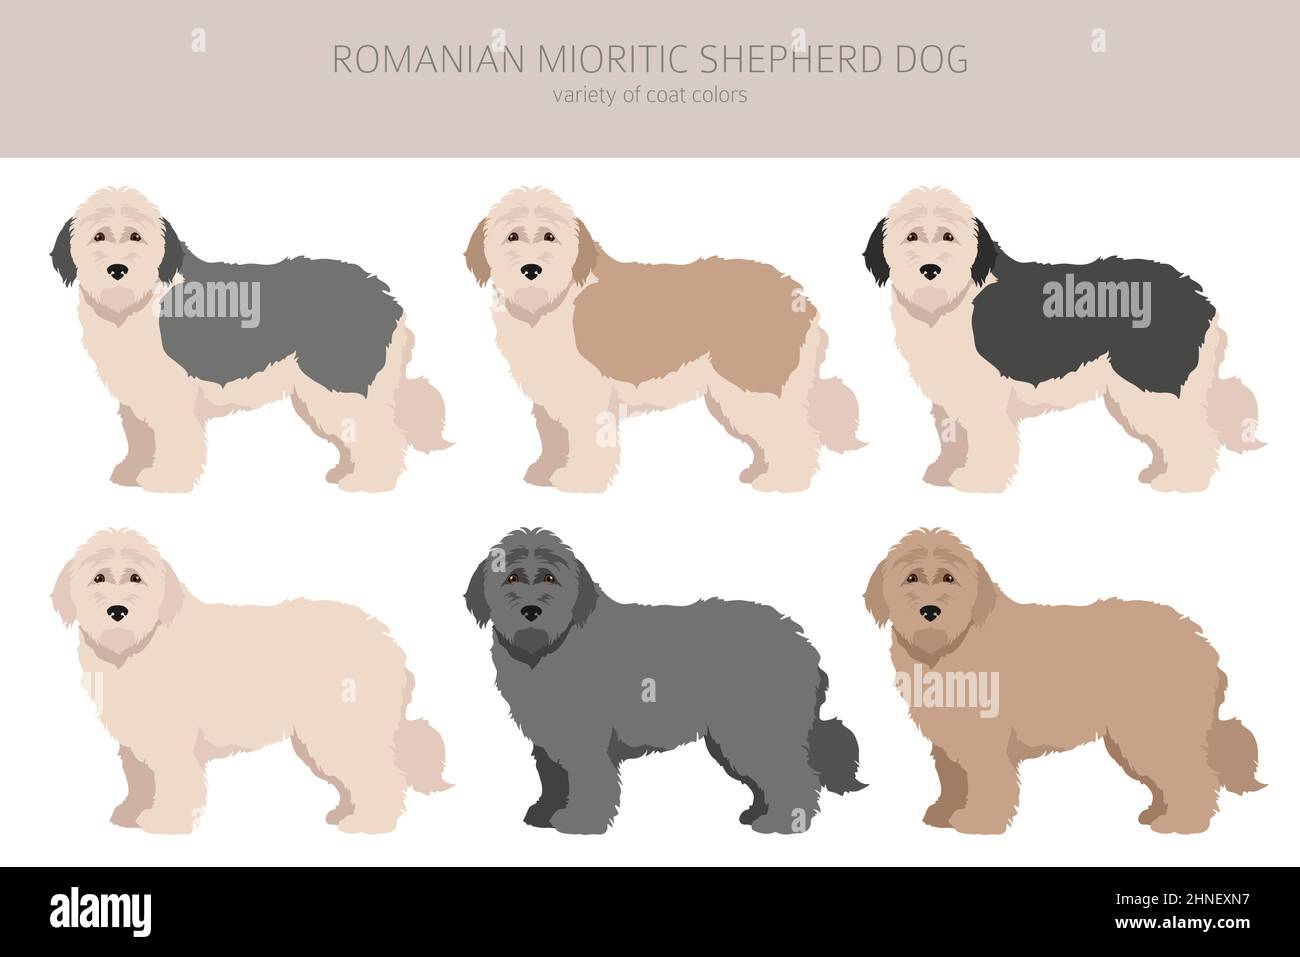 are romanian mioritic shepherds healthy